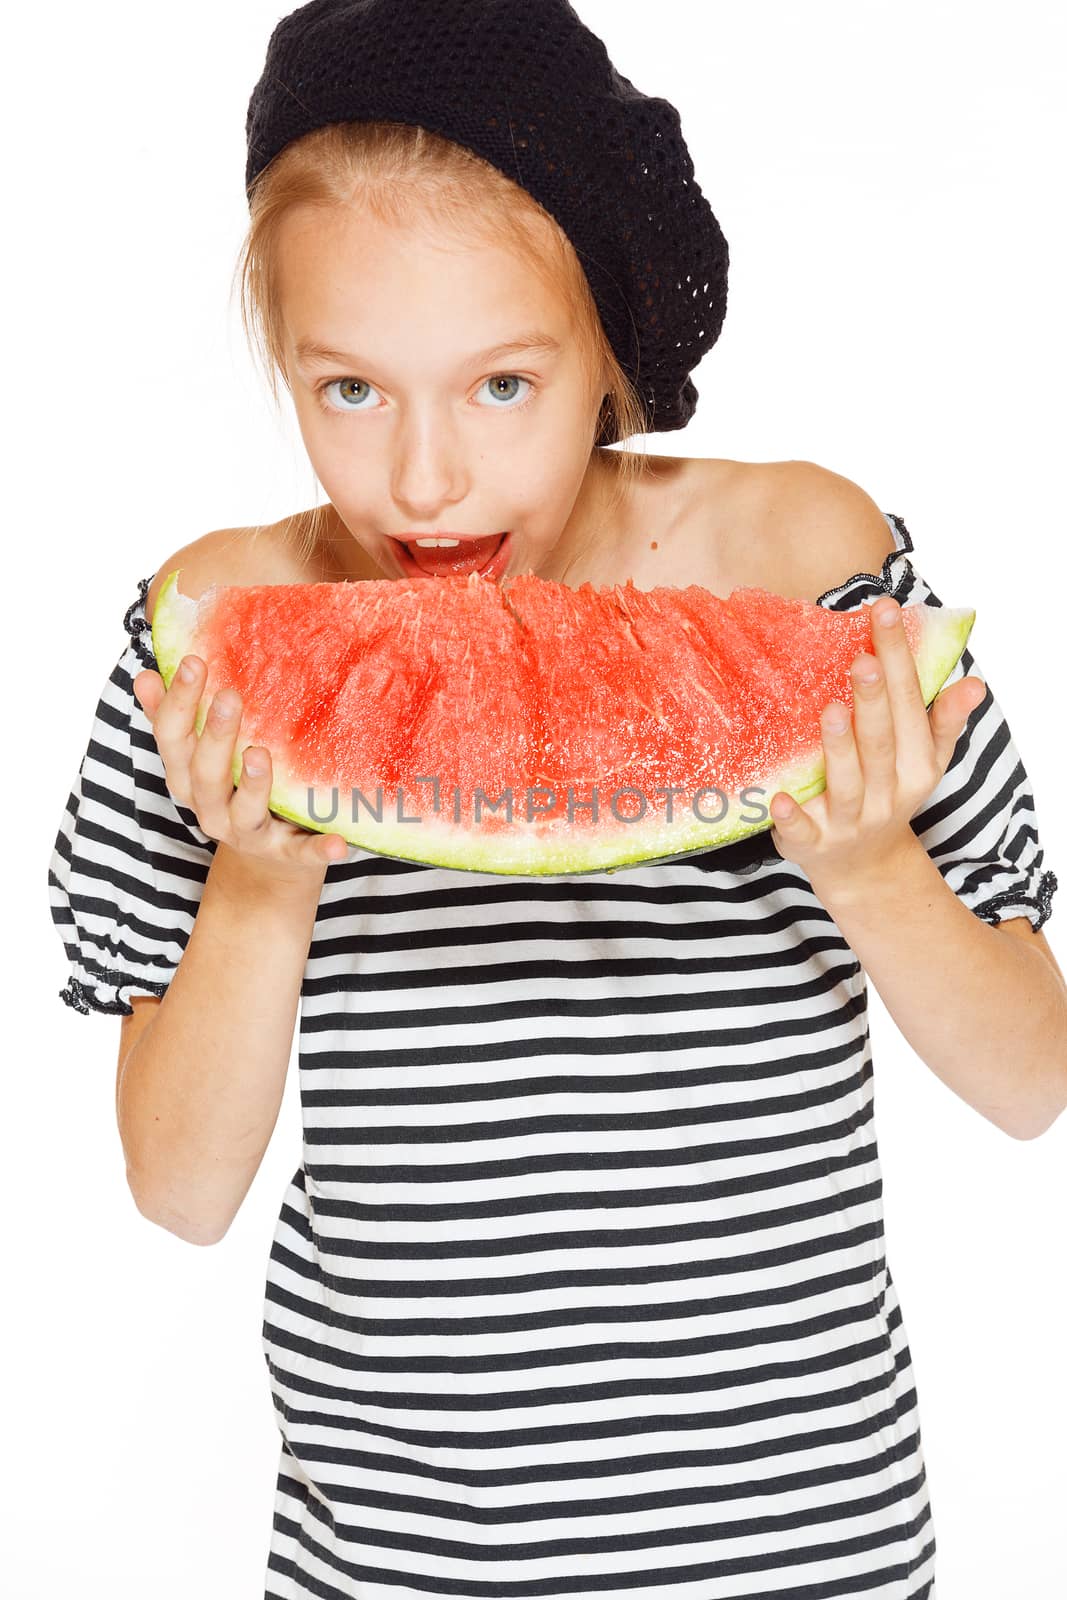 Little girl with watermelon by gorov108